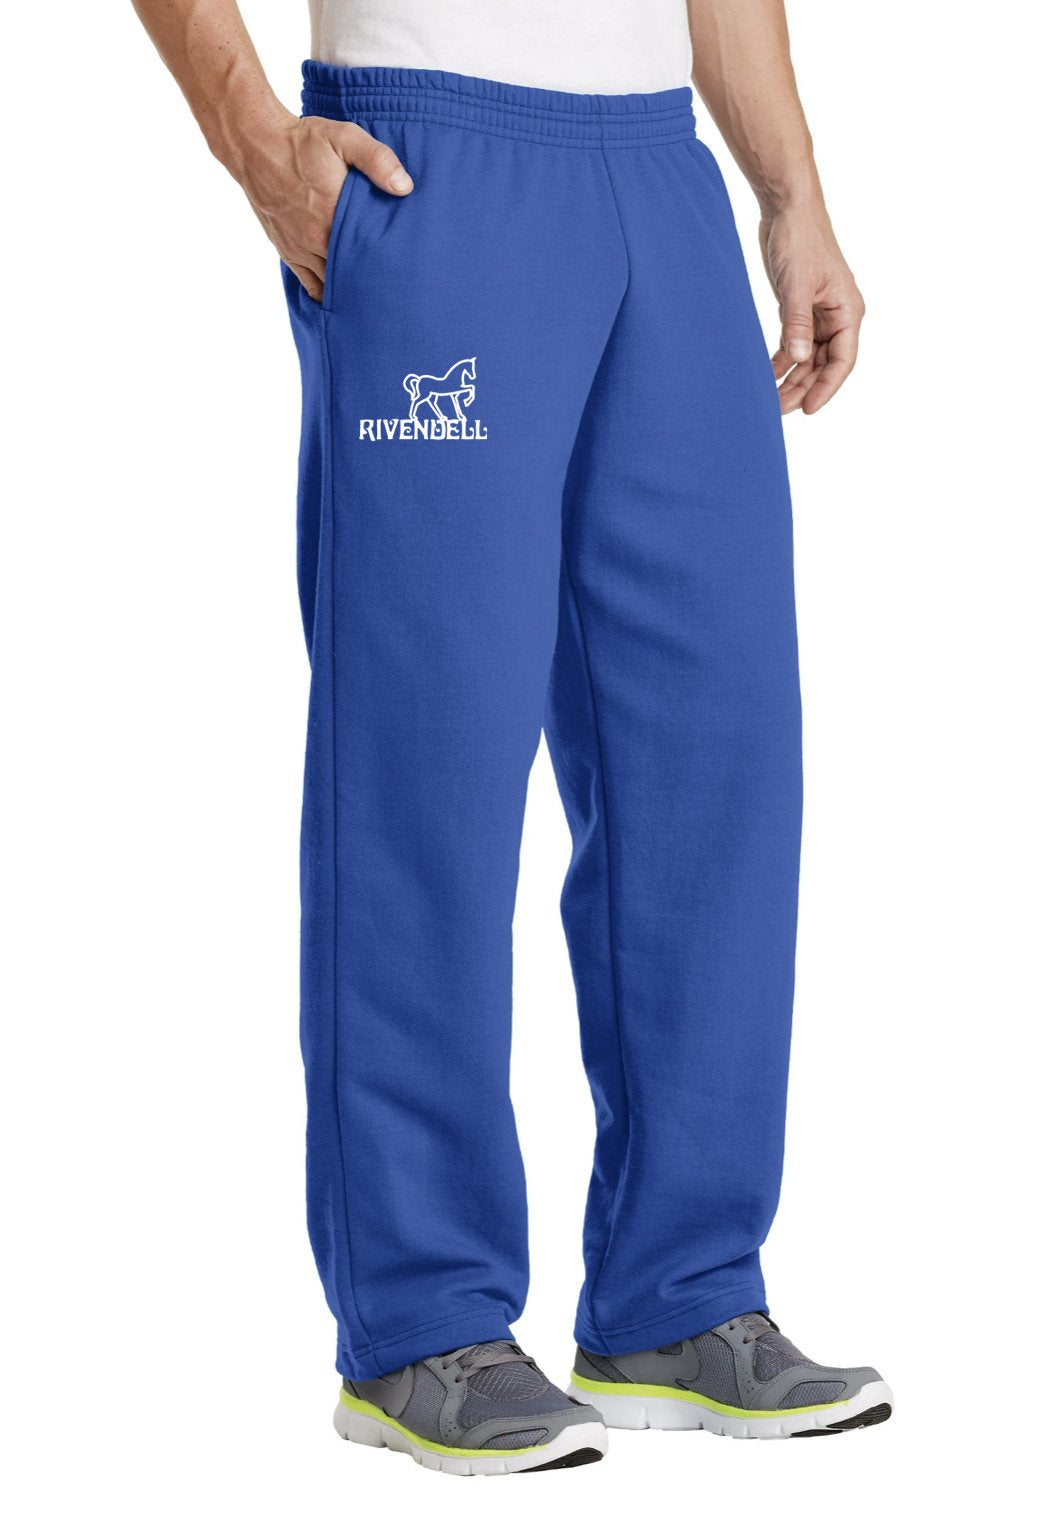 Rivendell Core Fleece Sweatpant with Pockets - Adult Unisex + Youth Sizes